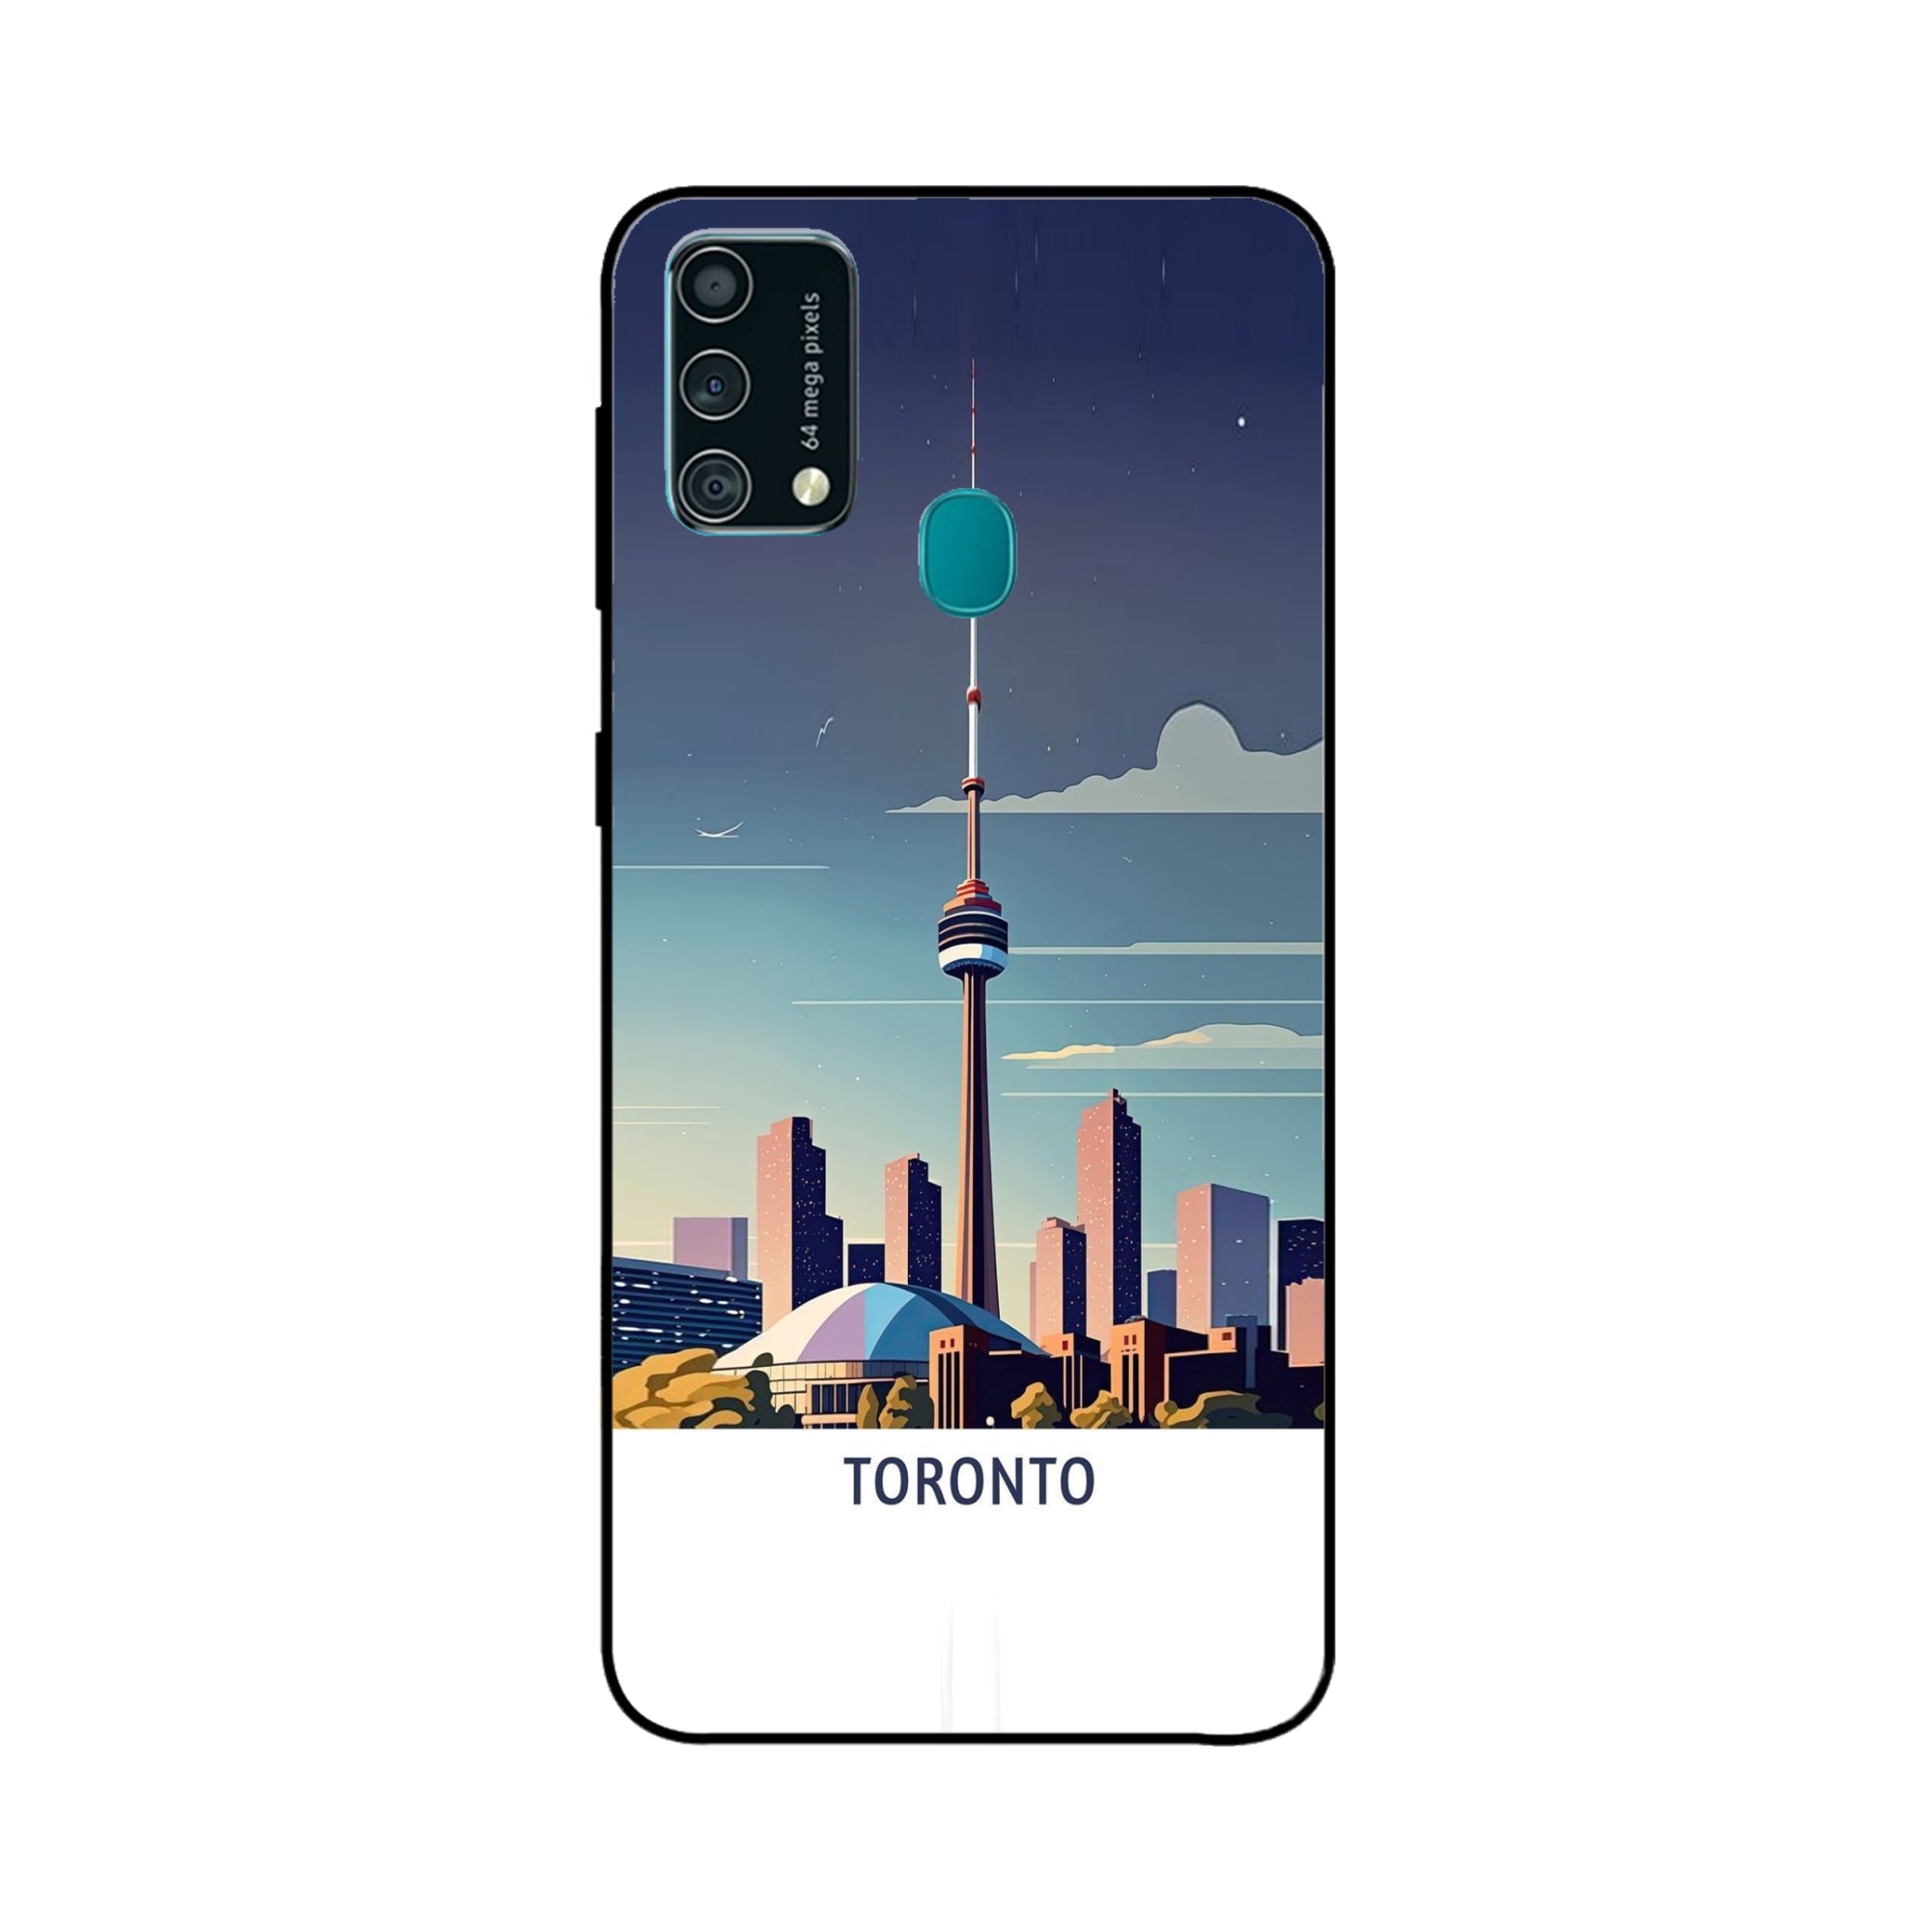 Buy Toronto Metal-Silicon Back Mobile Phone Case/Cover For Samsung Galaxy F41 Online